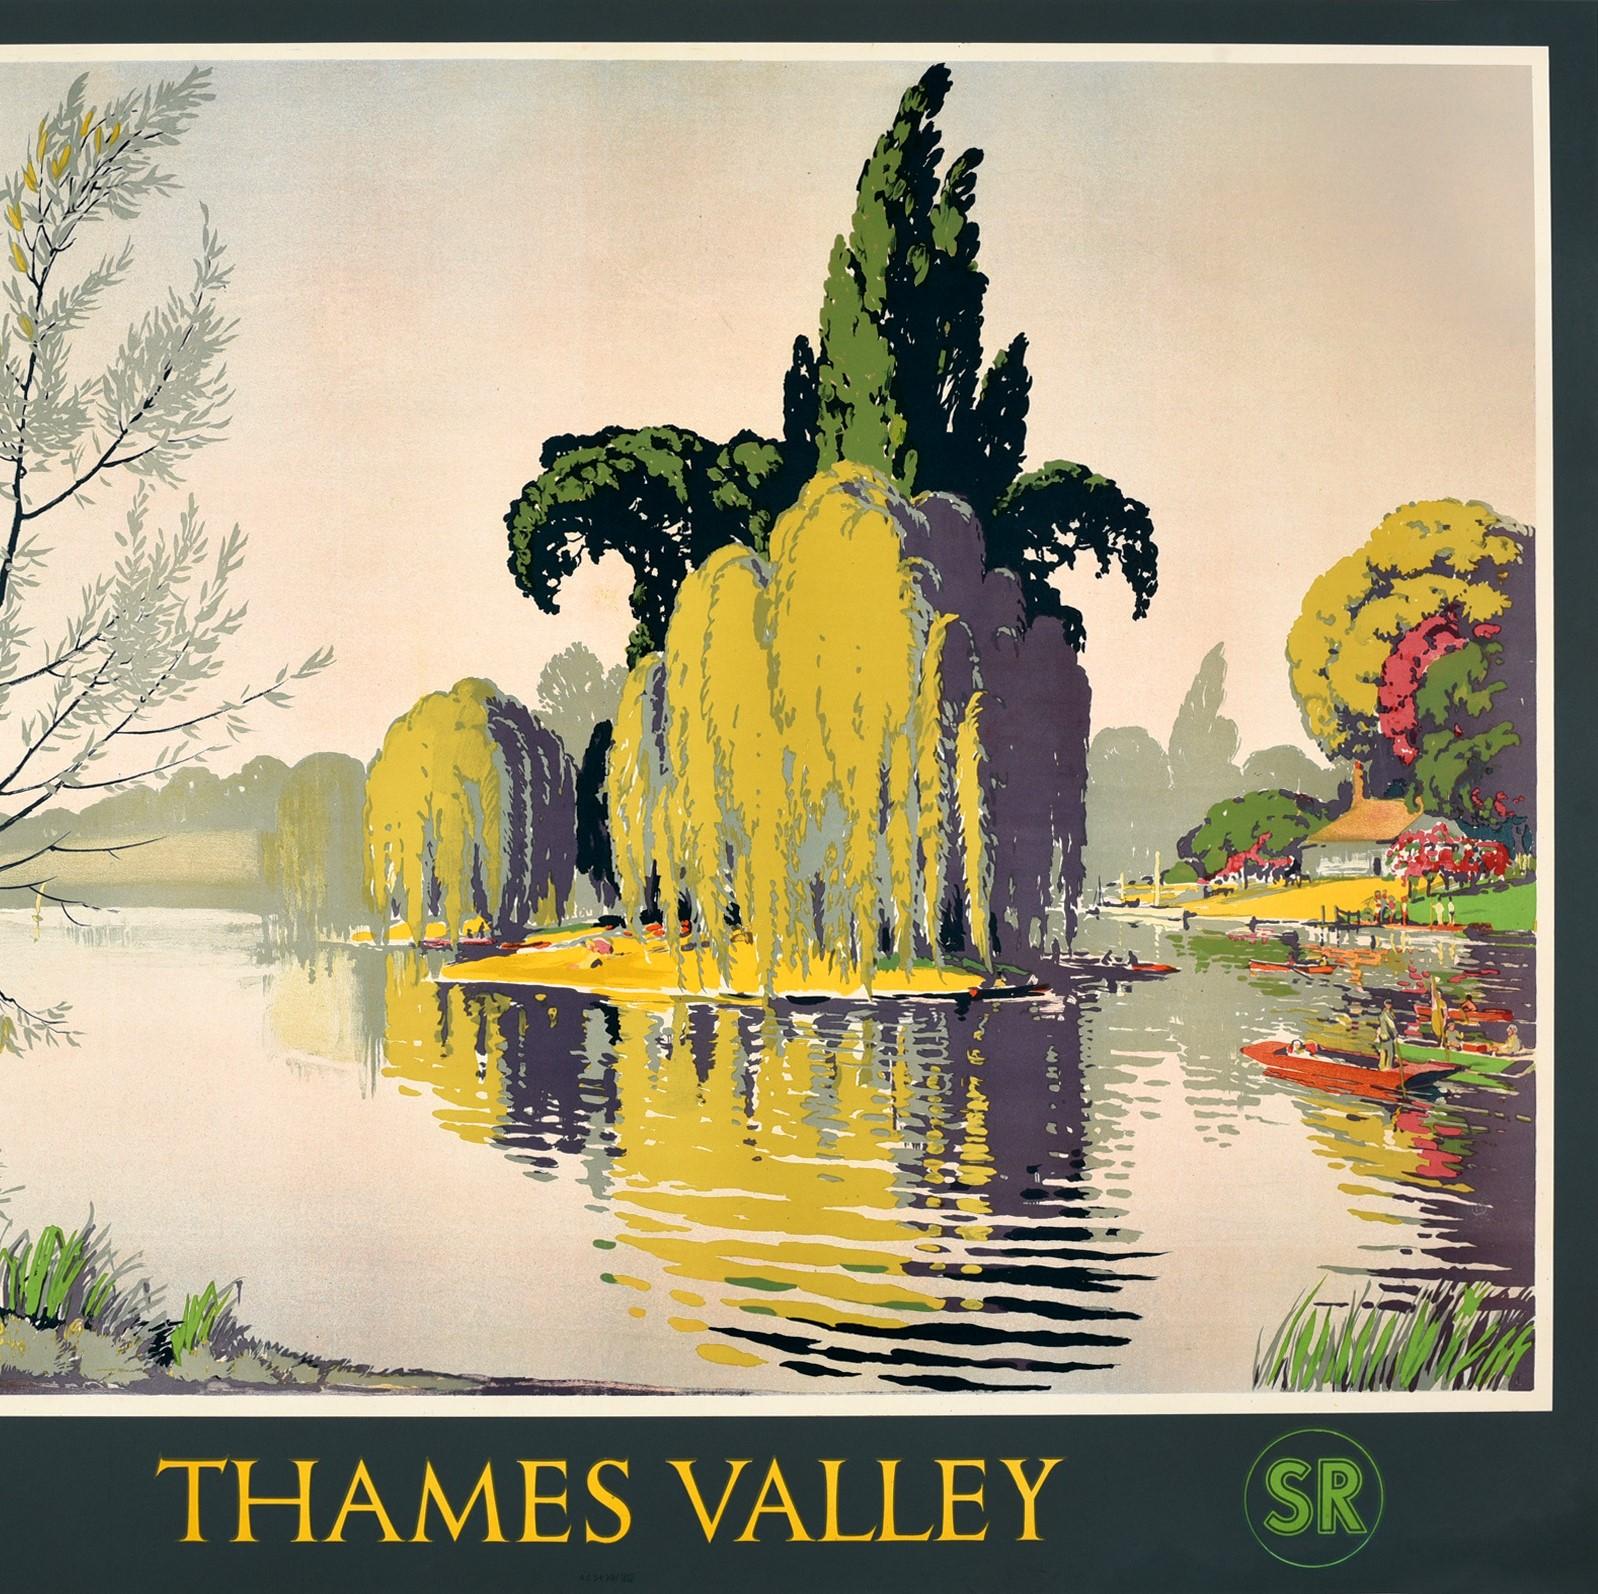 Original Vintage Great Western And Southern Railway Poster Thames Valley GWR SR In Good Condition For Sale In London, GB